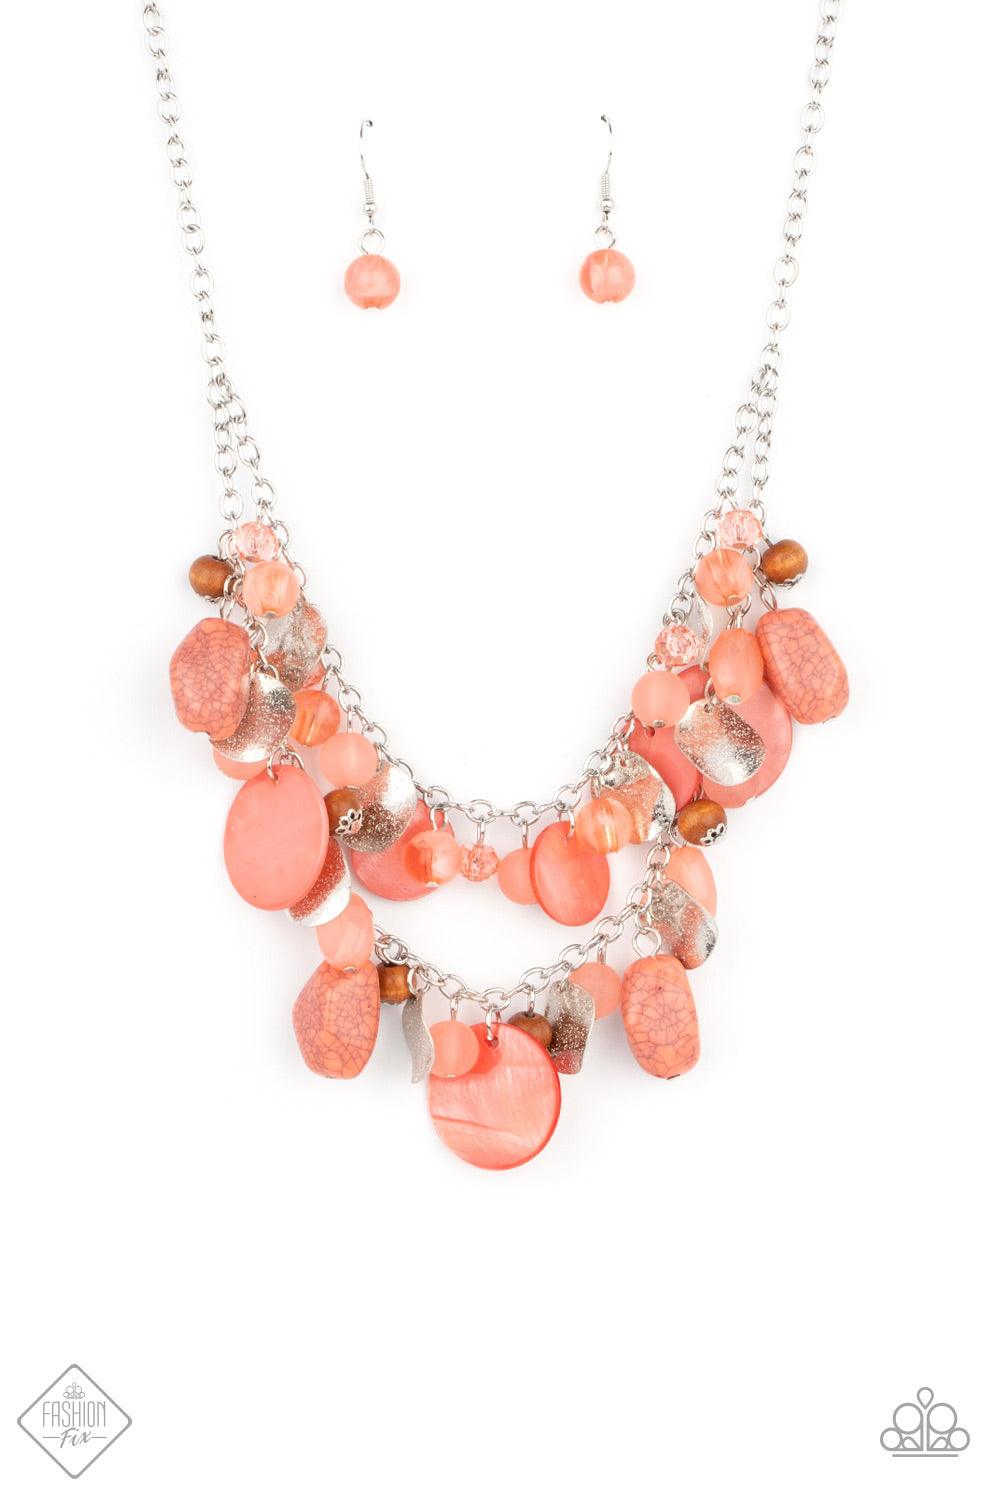 Paparazzi Accessories Spring Goddess - Orange What better way to say "hello spring" than with this vibrant stunner? Double the fun with two layers of beads, baubles, stone, and wood in varying tones and finishes in the Pantone® of Burnt Coral, intermixed